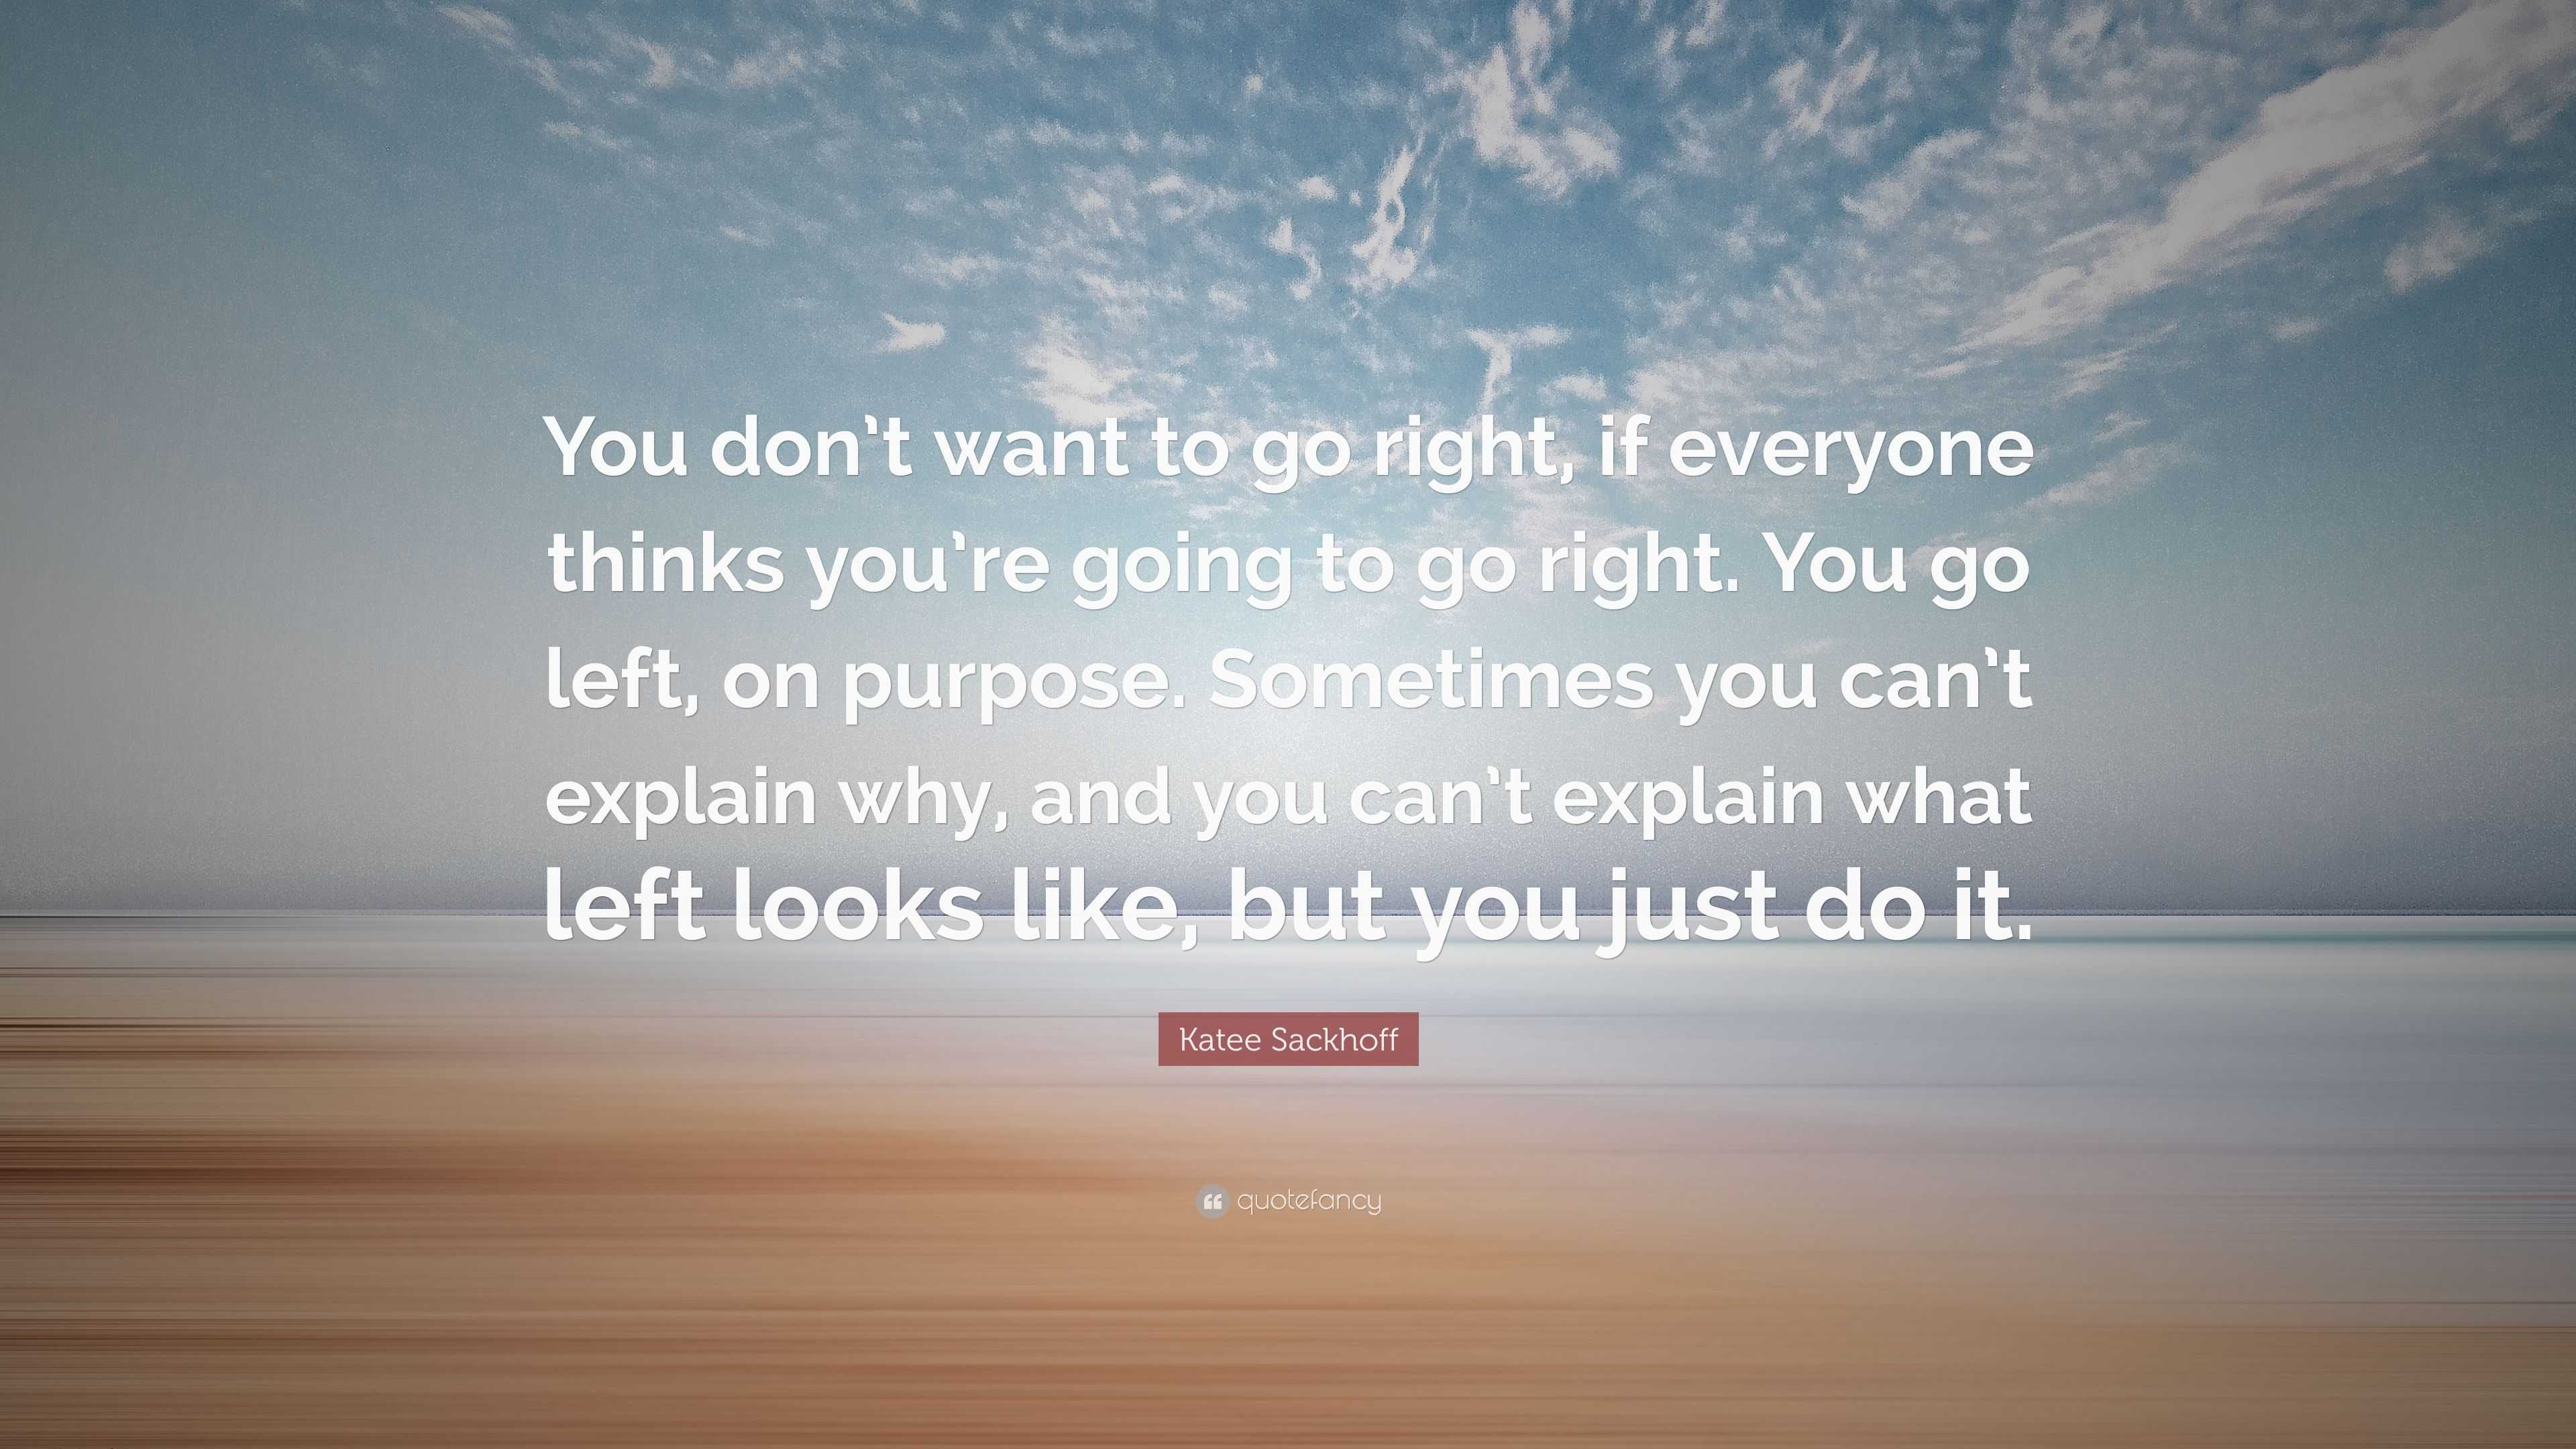 Katee Sackhoff Quote: “You don’t want to go right, if everyone thinks ...